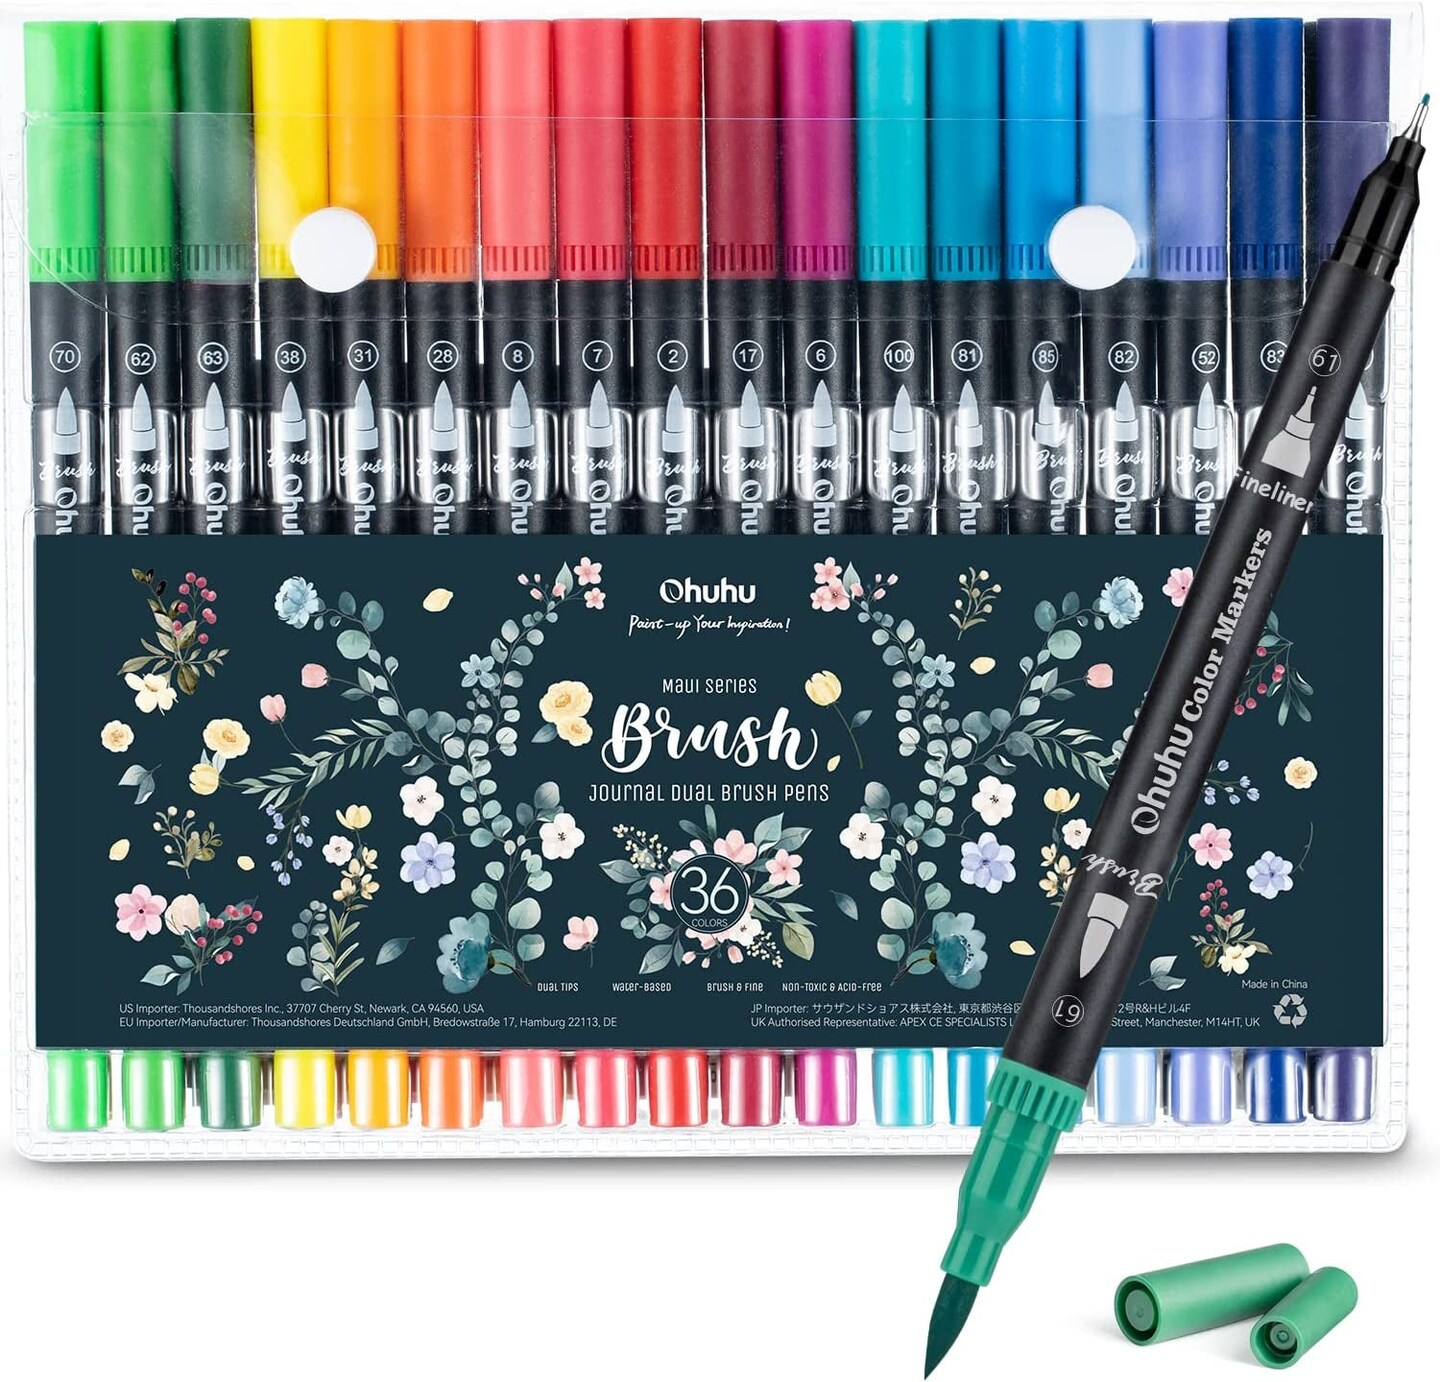 Markers for Adult Coloring Books: 36 Colors Coloring Markers Dual